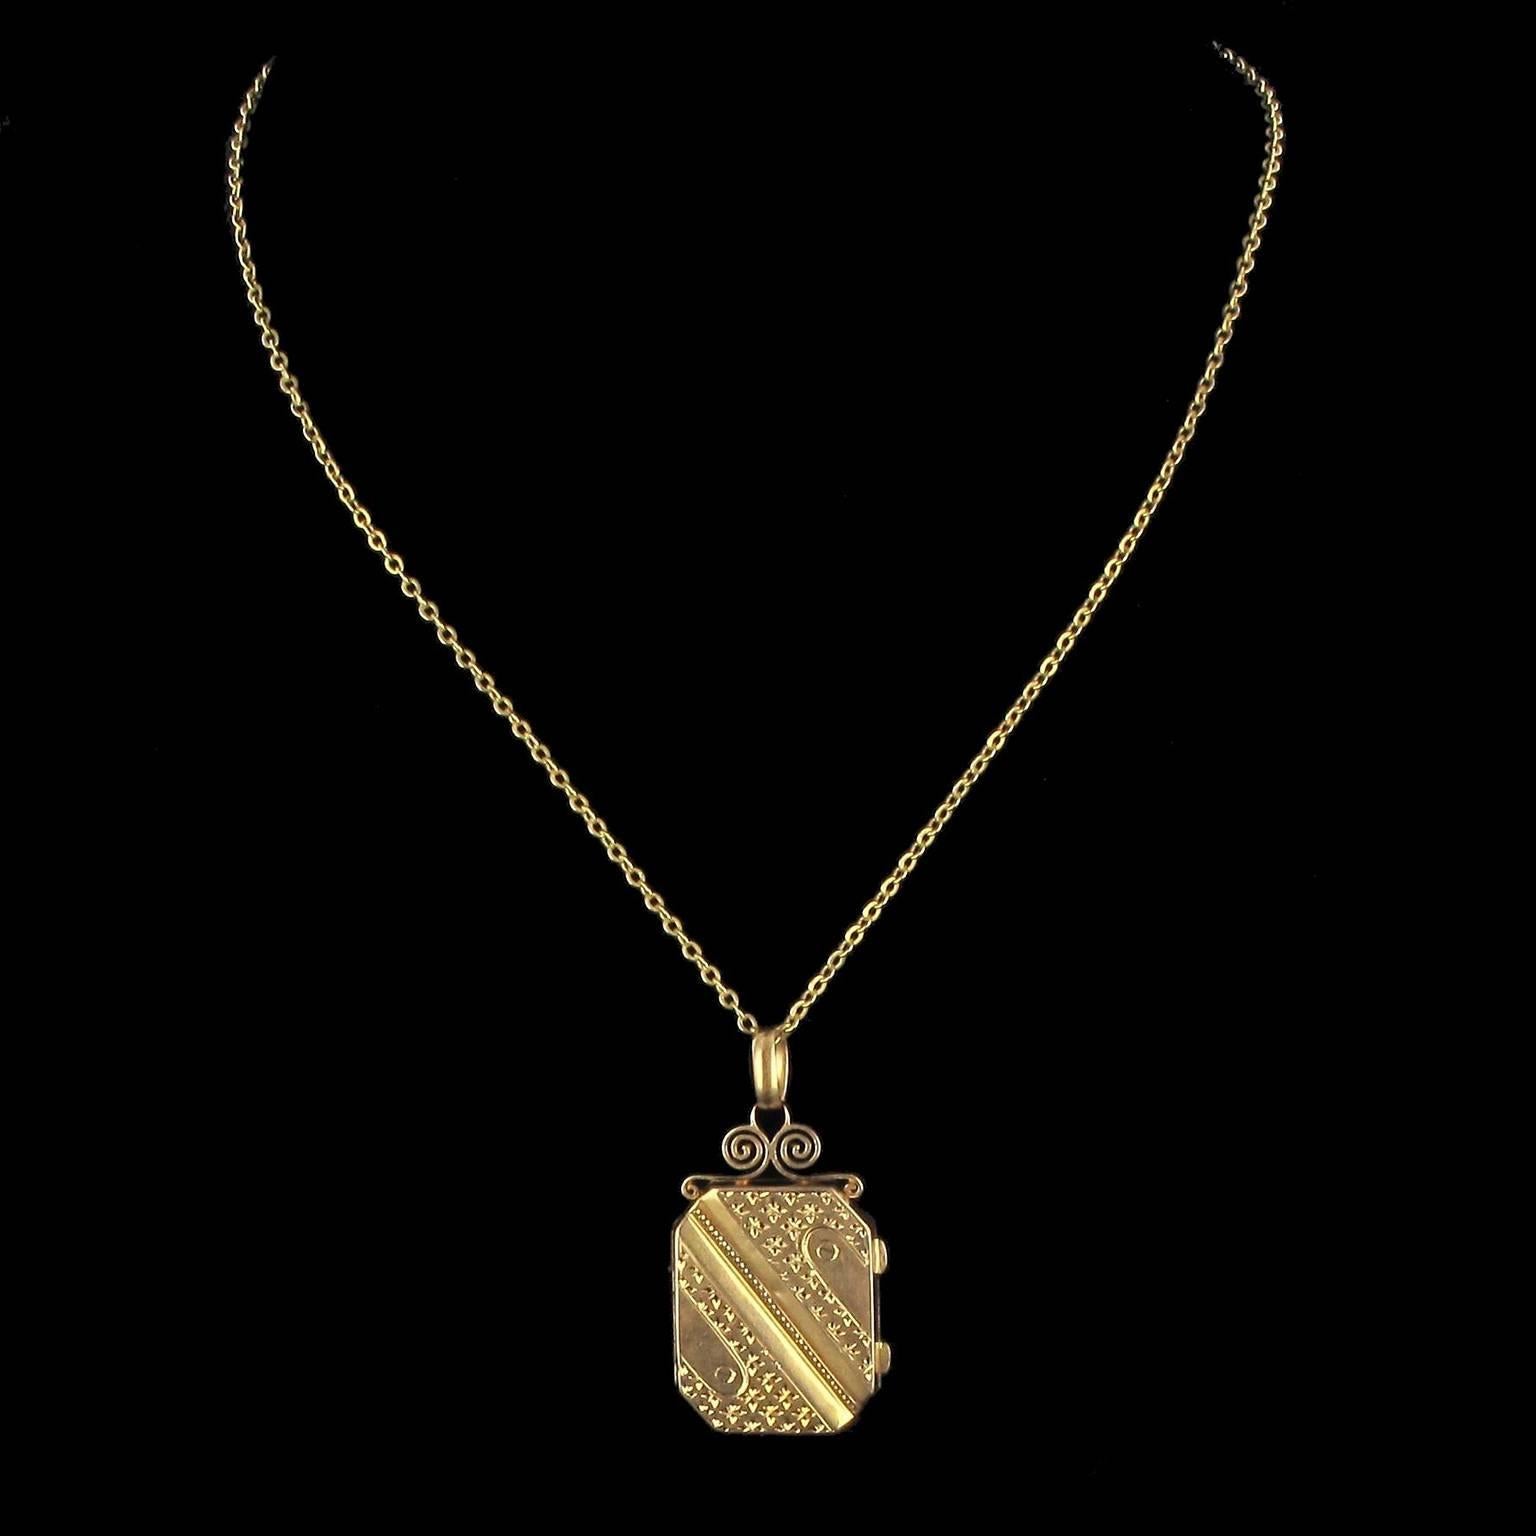 Pendant in 18 karat yellow gold, eagle head hallmark. 
This lovely gold rectangular medallion is engraved and pierced with a floral motif separated by a diagonal recess above which is an arabesque design leading to the bail. The medallion opens to